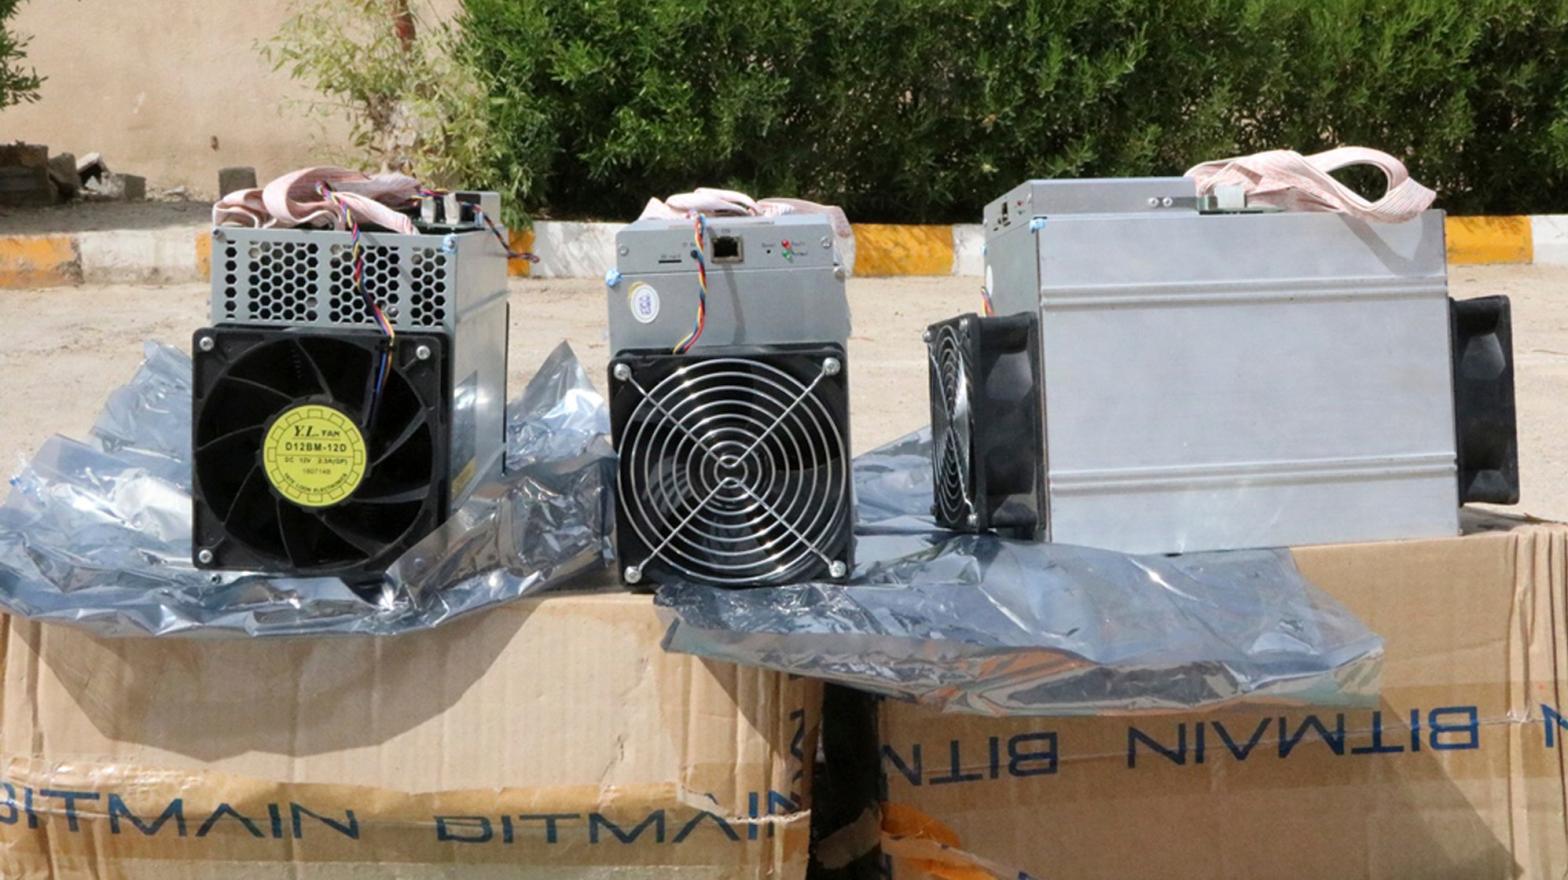 Boxes of machinery used in bitcoin mining operations that were confiscated by police in Nazarabad, Iran. (Photo: Police News Agency, AP)